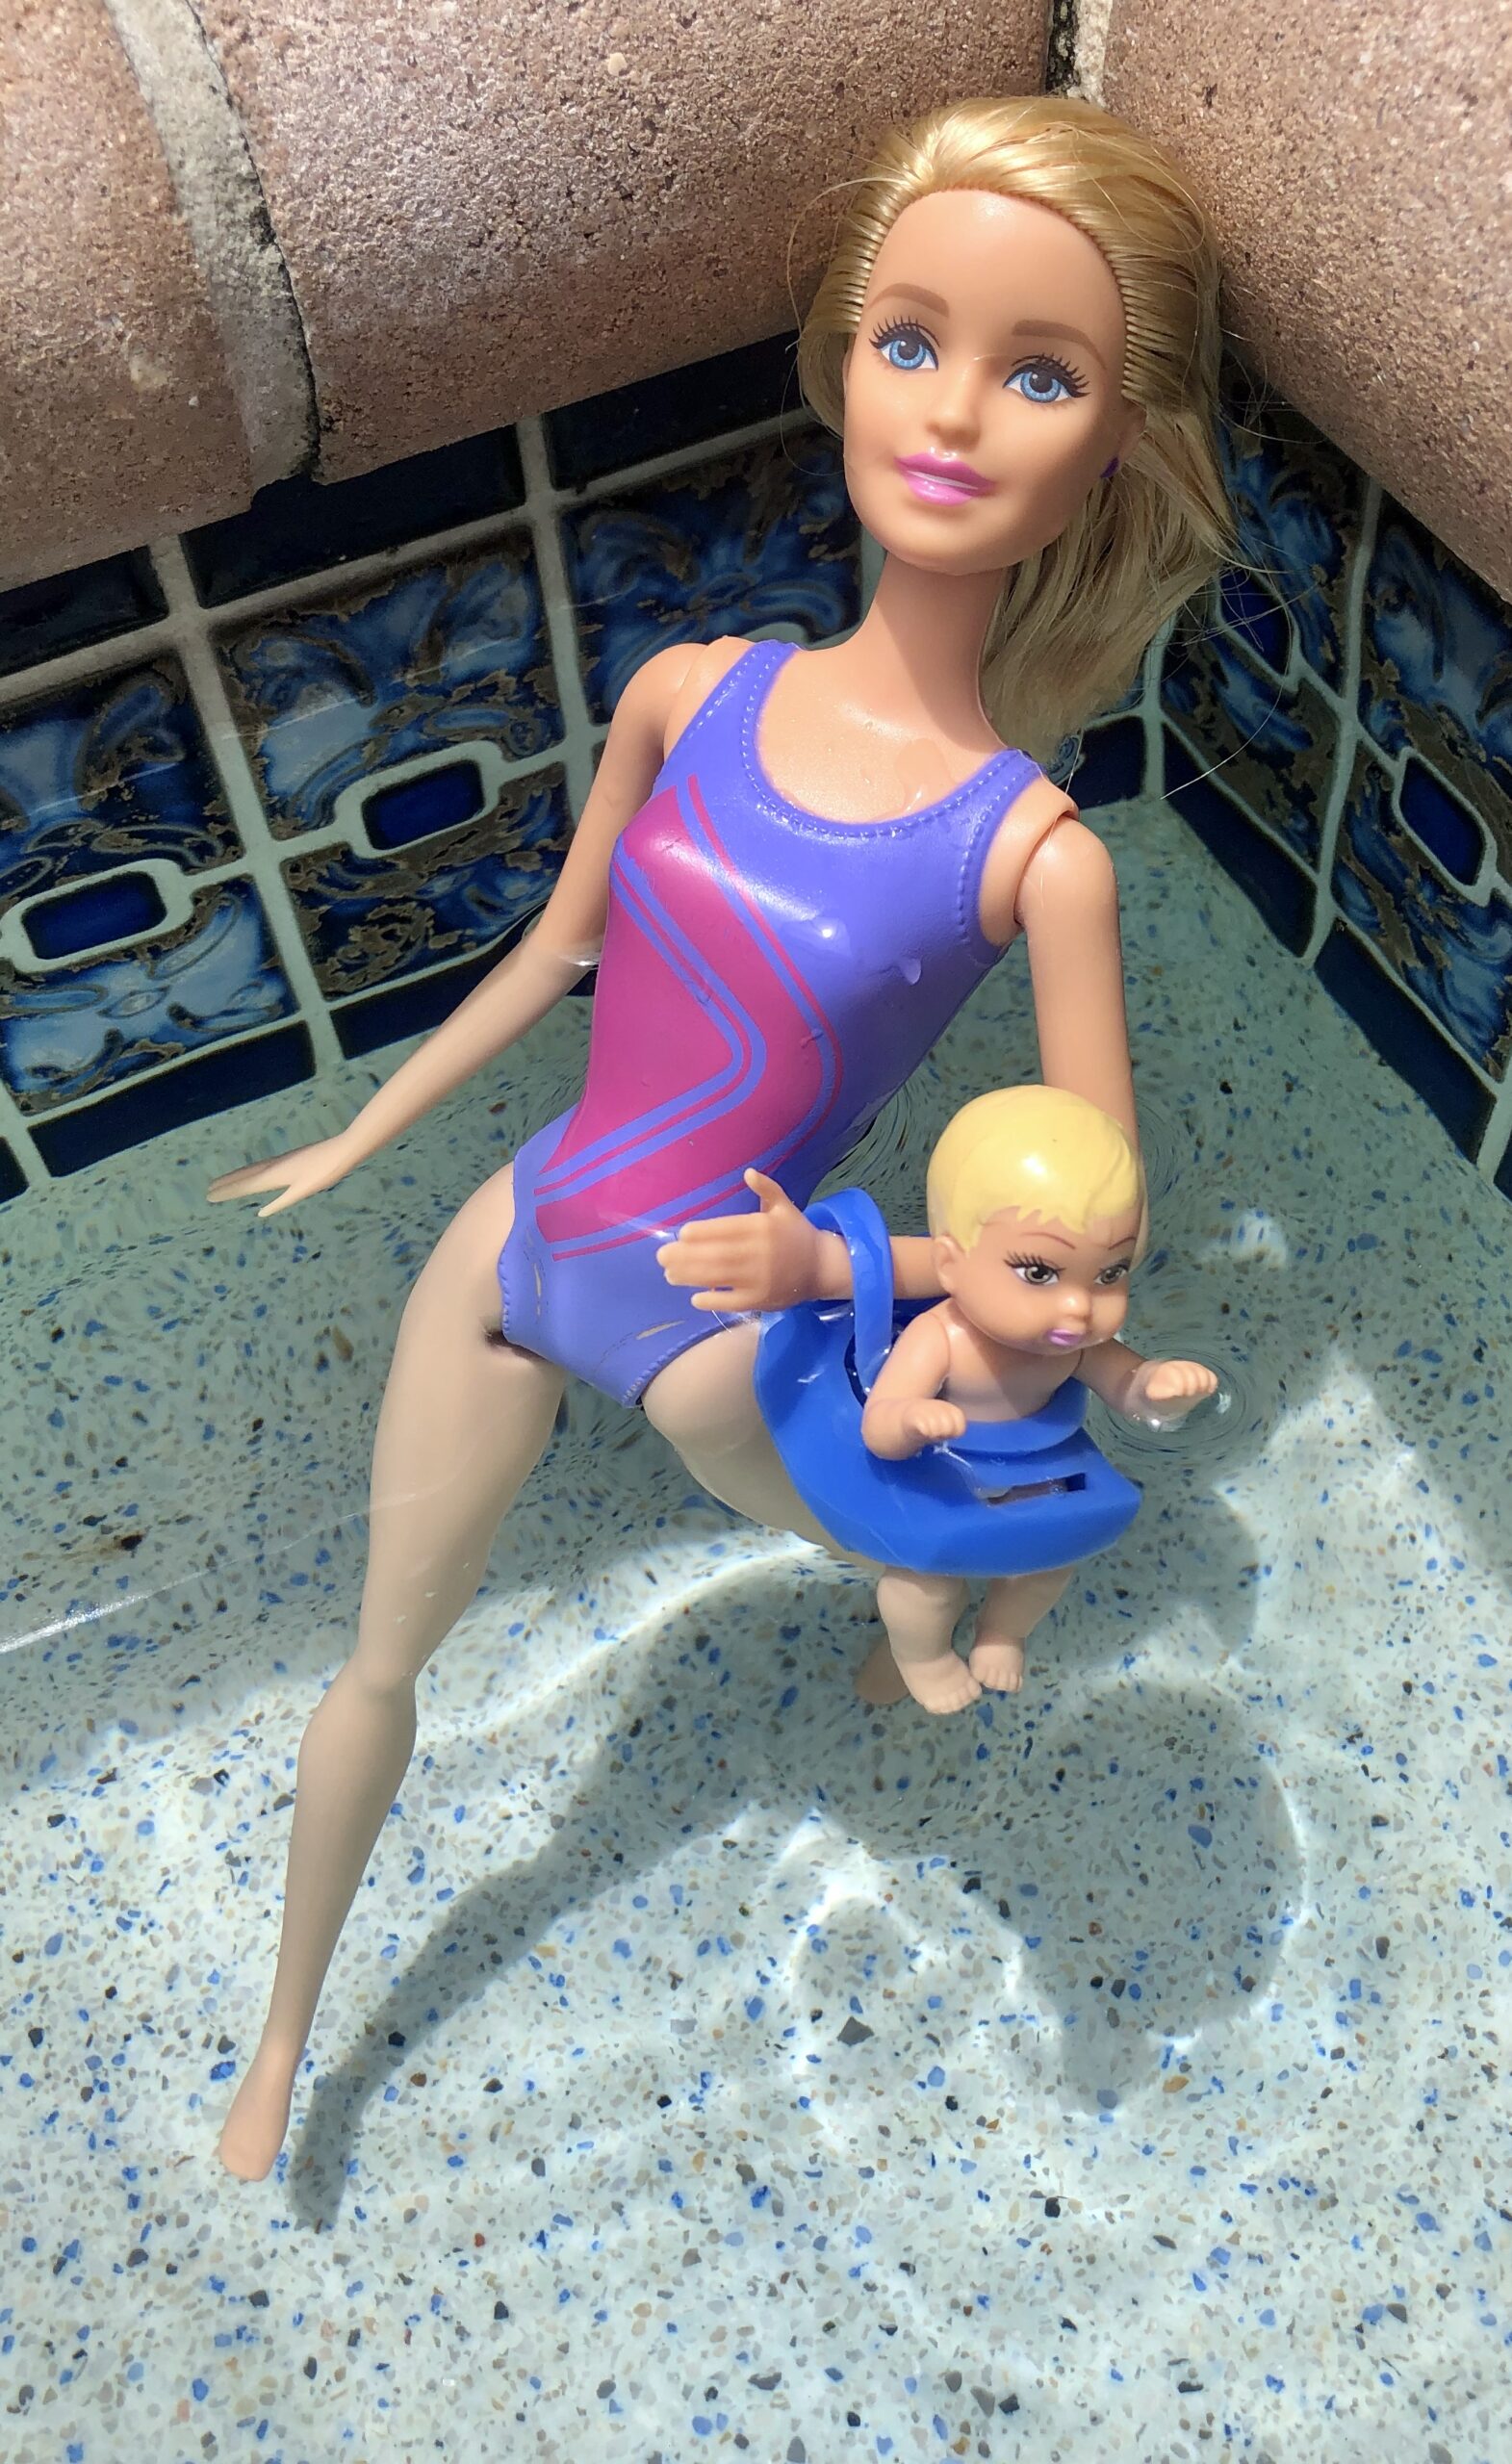 A Barbie and a baby in a pool for the Barbie Doll Story, Goodbye Costa Rica.